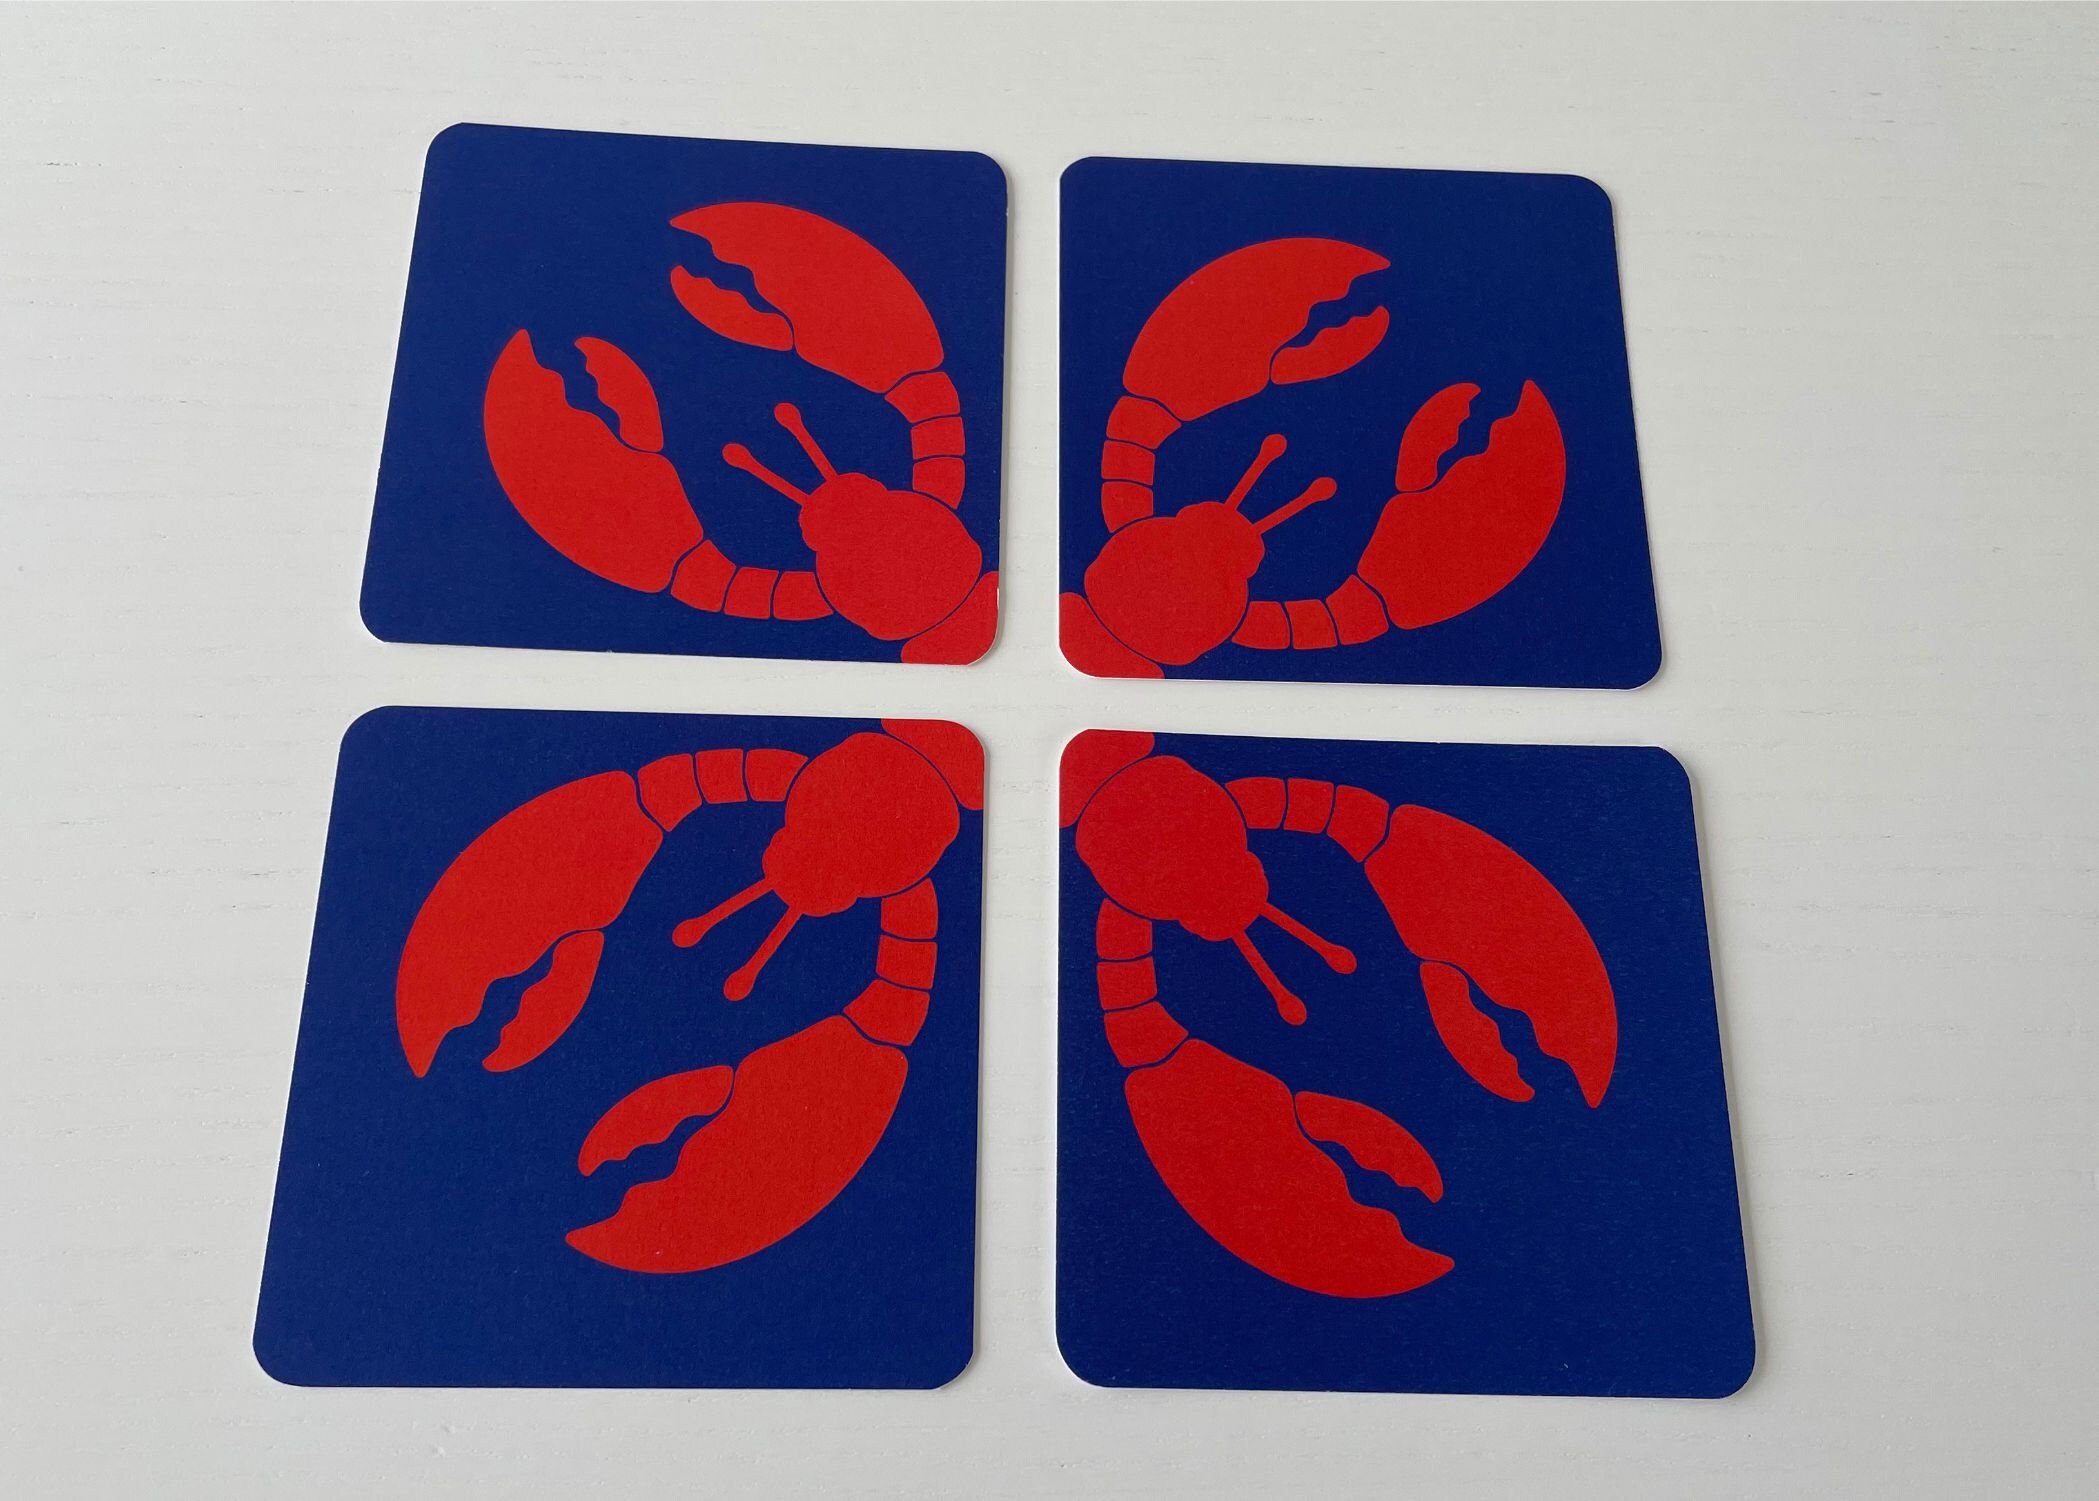 Lobster, Set Of 12 Coasters, Beach Party, Summer Decoration, Nautical Decor, Disposable , Table Seafood